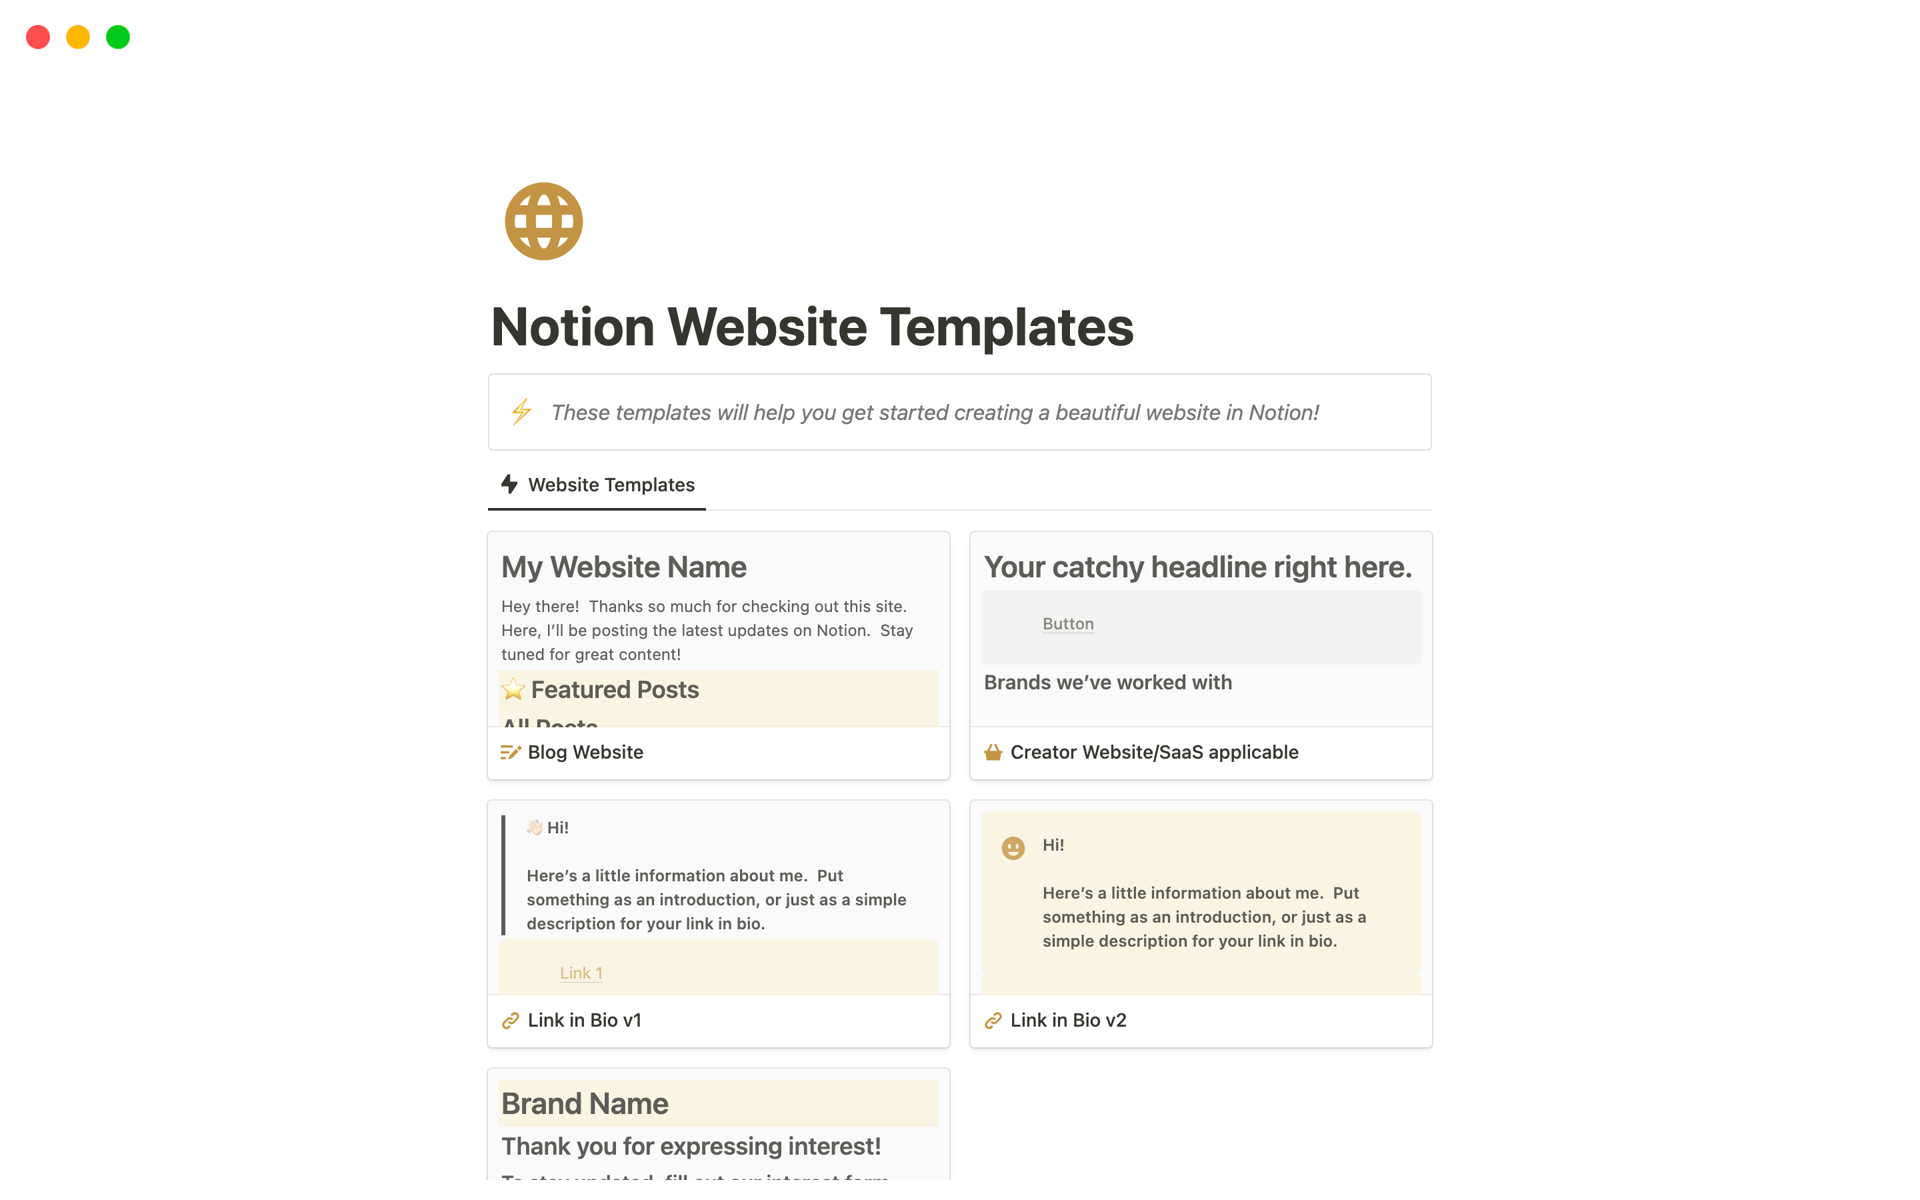 A template preview for Website Blueprints